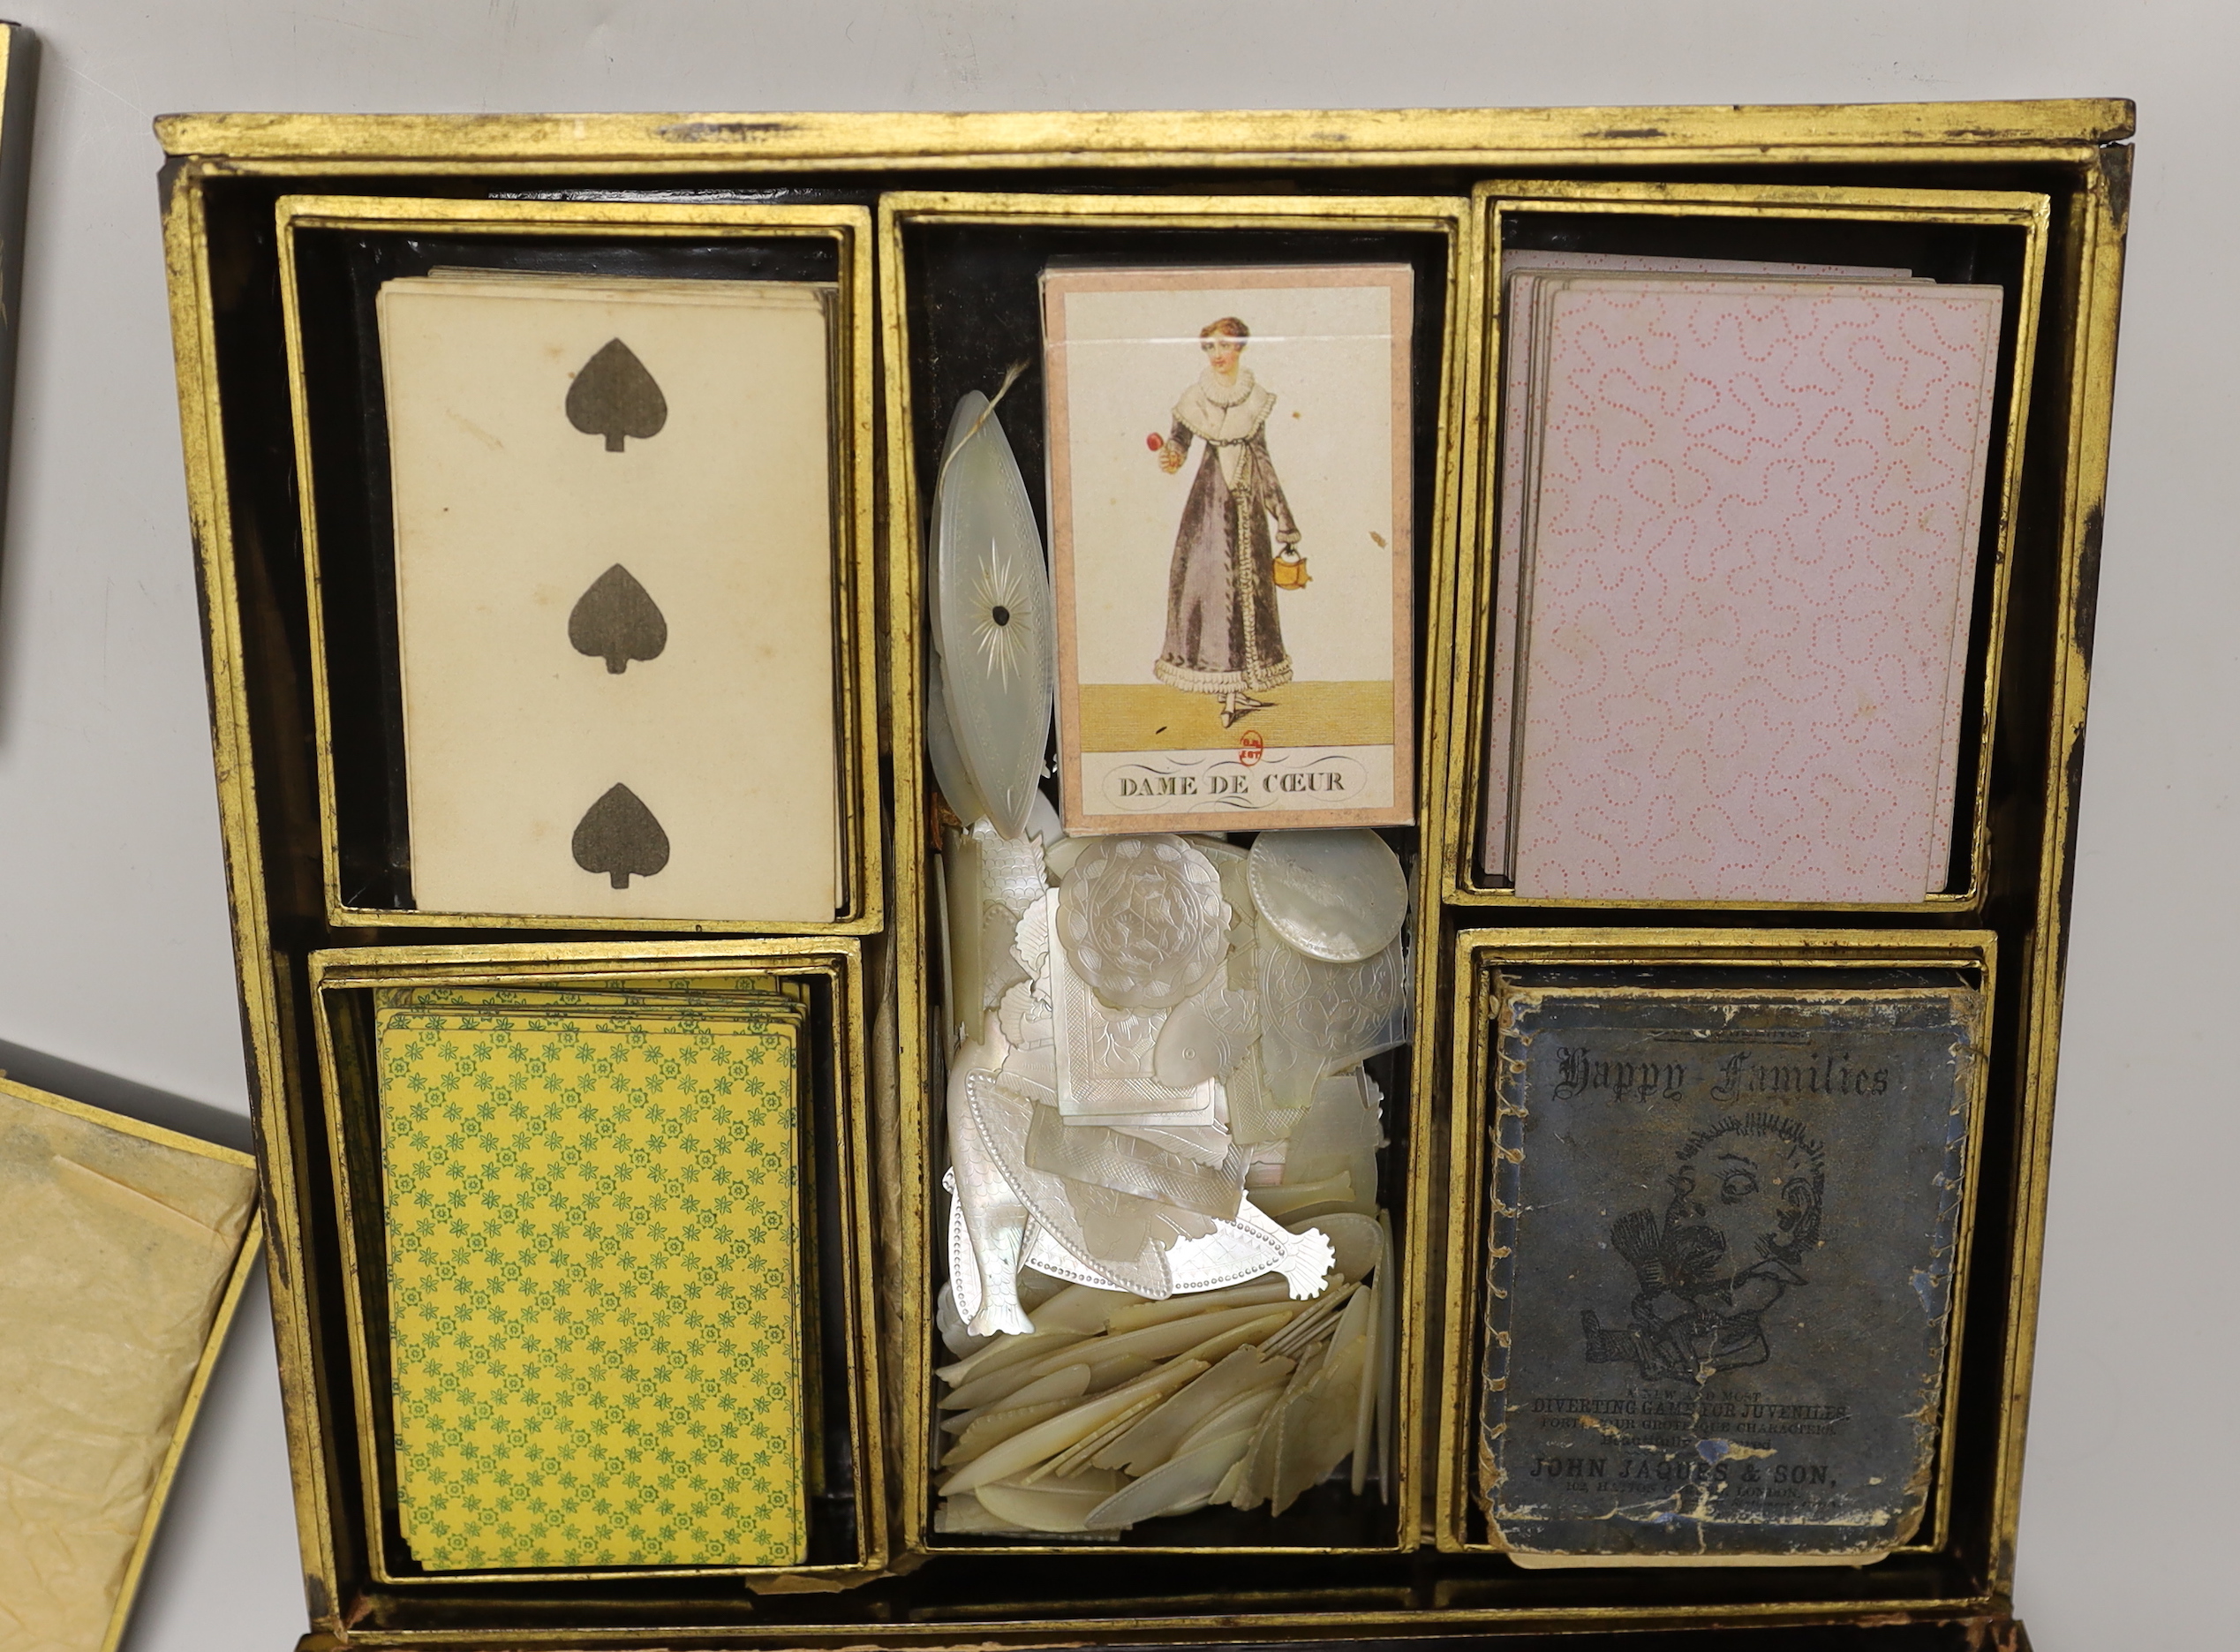 A Victorian gaming set with mother of pearl counters, contained in a mid 19th century Canton gilt decorated like a box with lidded containers, 29cm